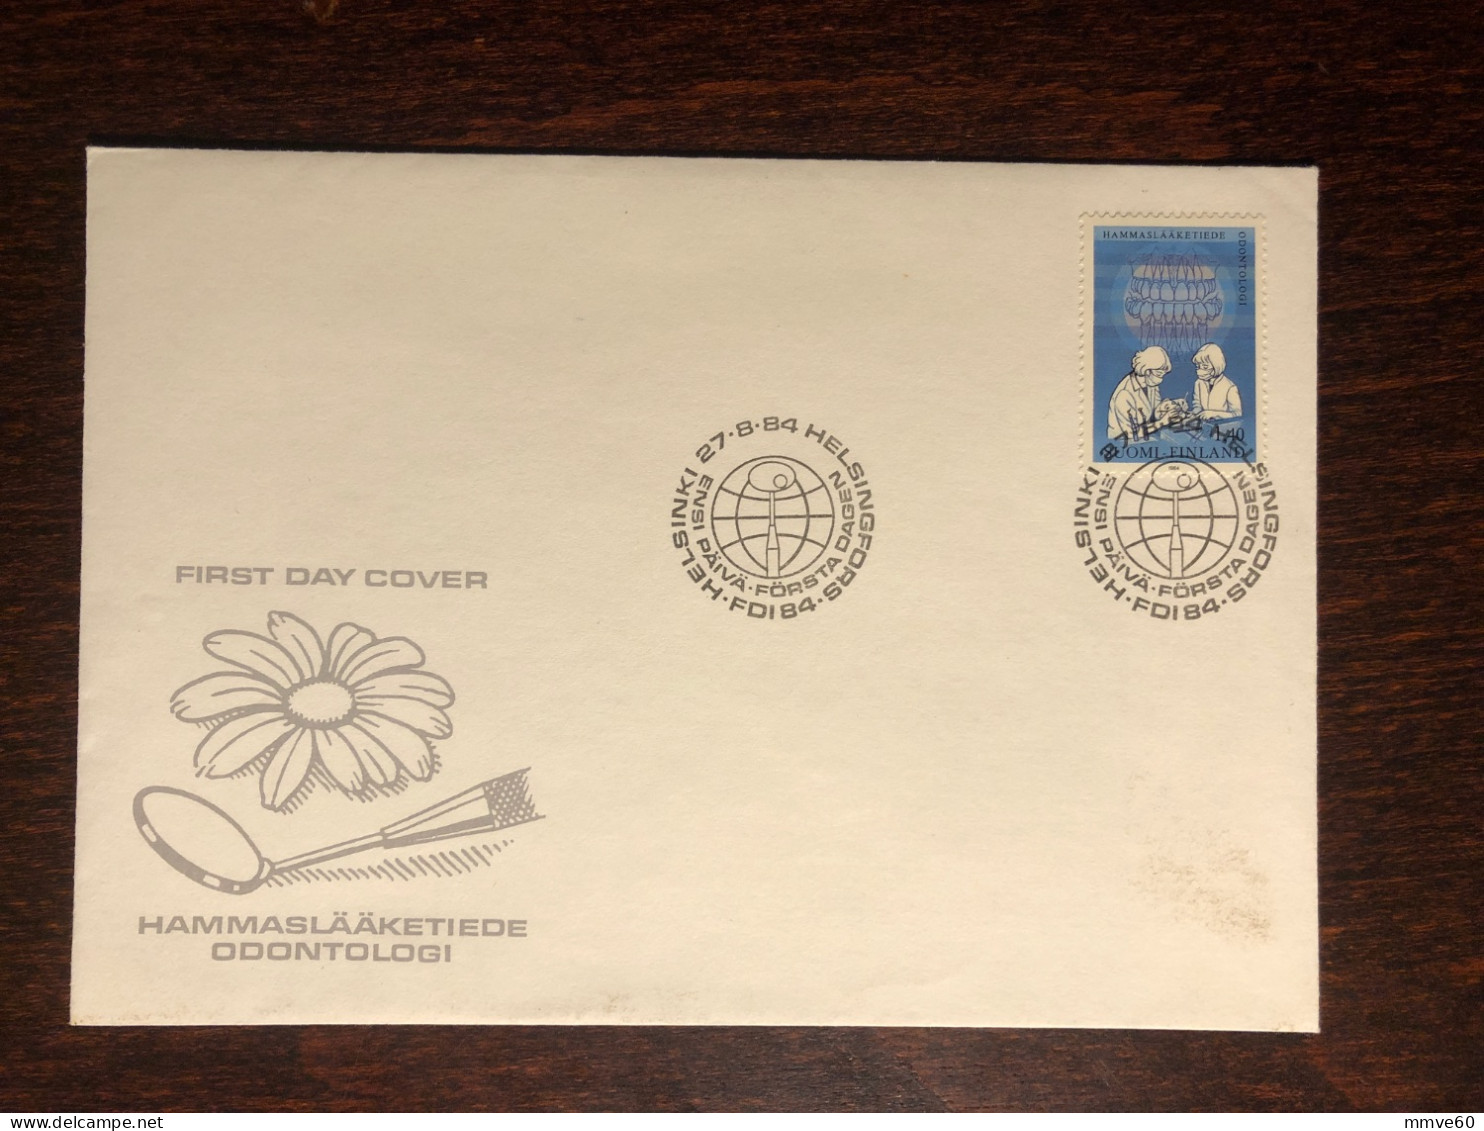 FINLAND FDC COVER 1984 YEAR  DENTISTRY DENTAL HEALTH MEDICINE STAMPS - Covers & Documents